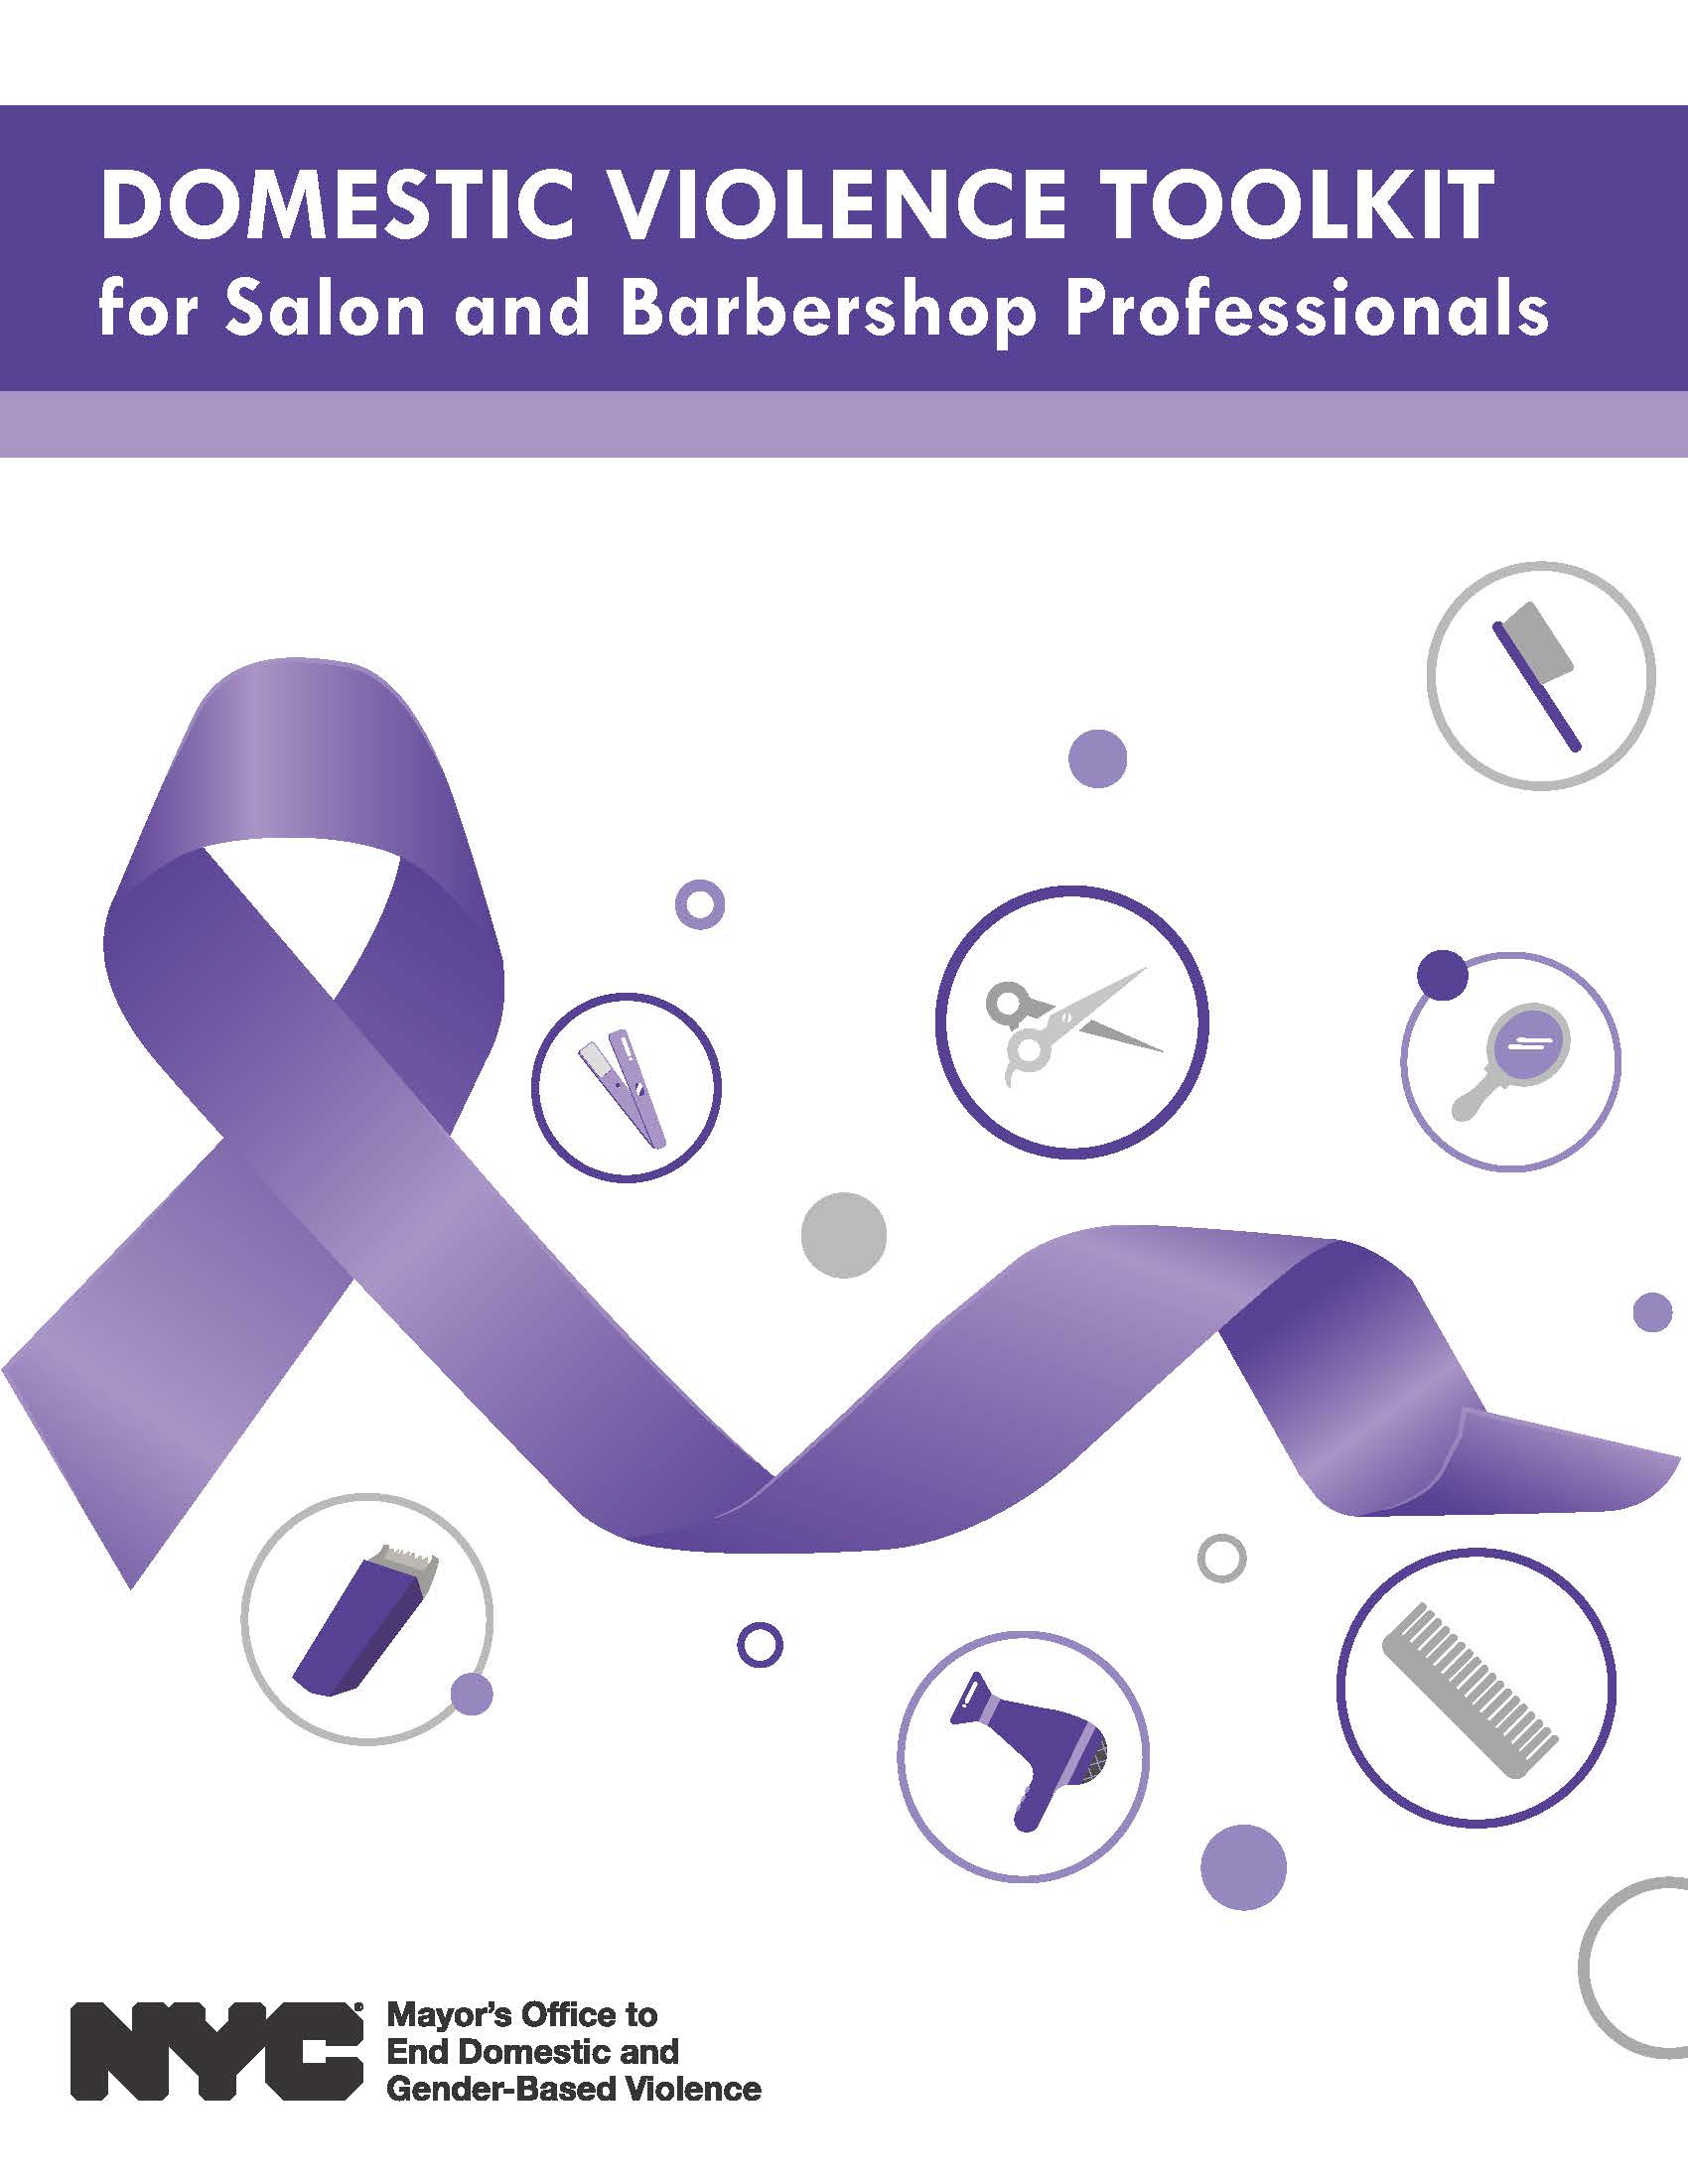 A poster for Domestic Violence Toolkit for Salon and Barbershop Professionals